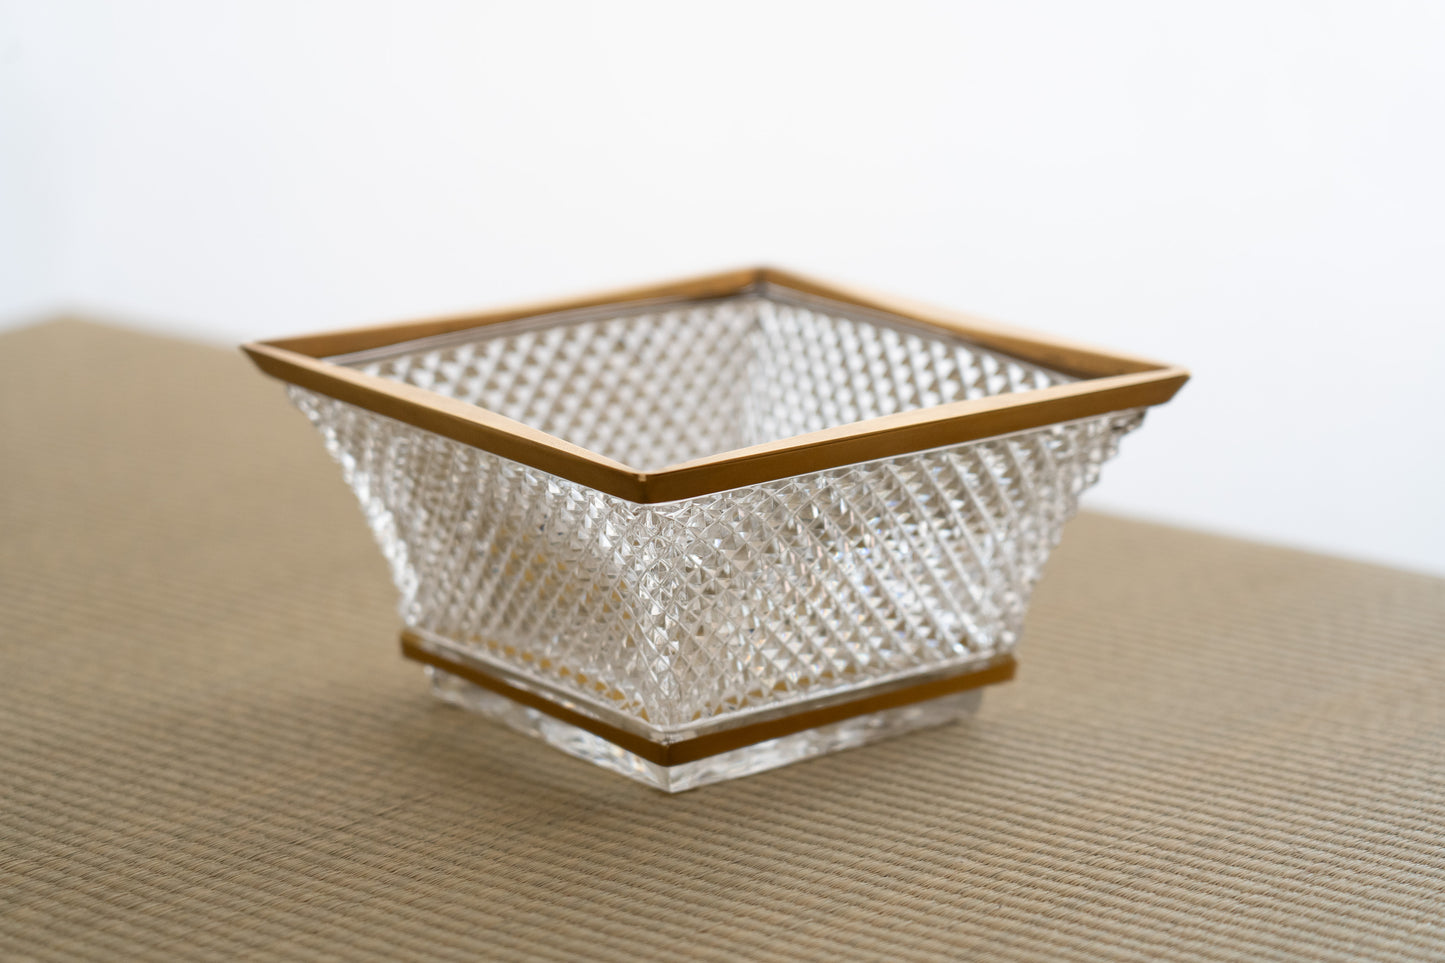 Gilded square shaped cut-glass bowl with plain diamonds on sides, Harumi Baccarat［Reproduction］